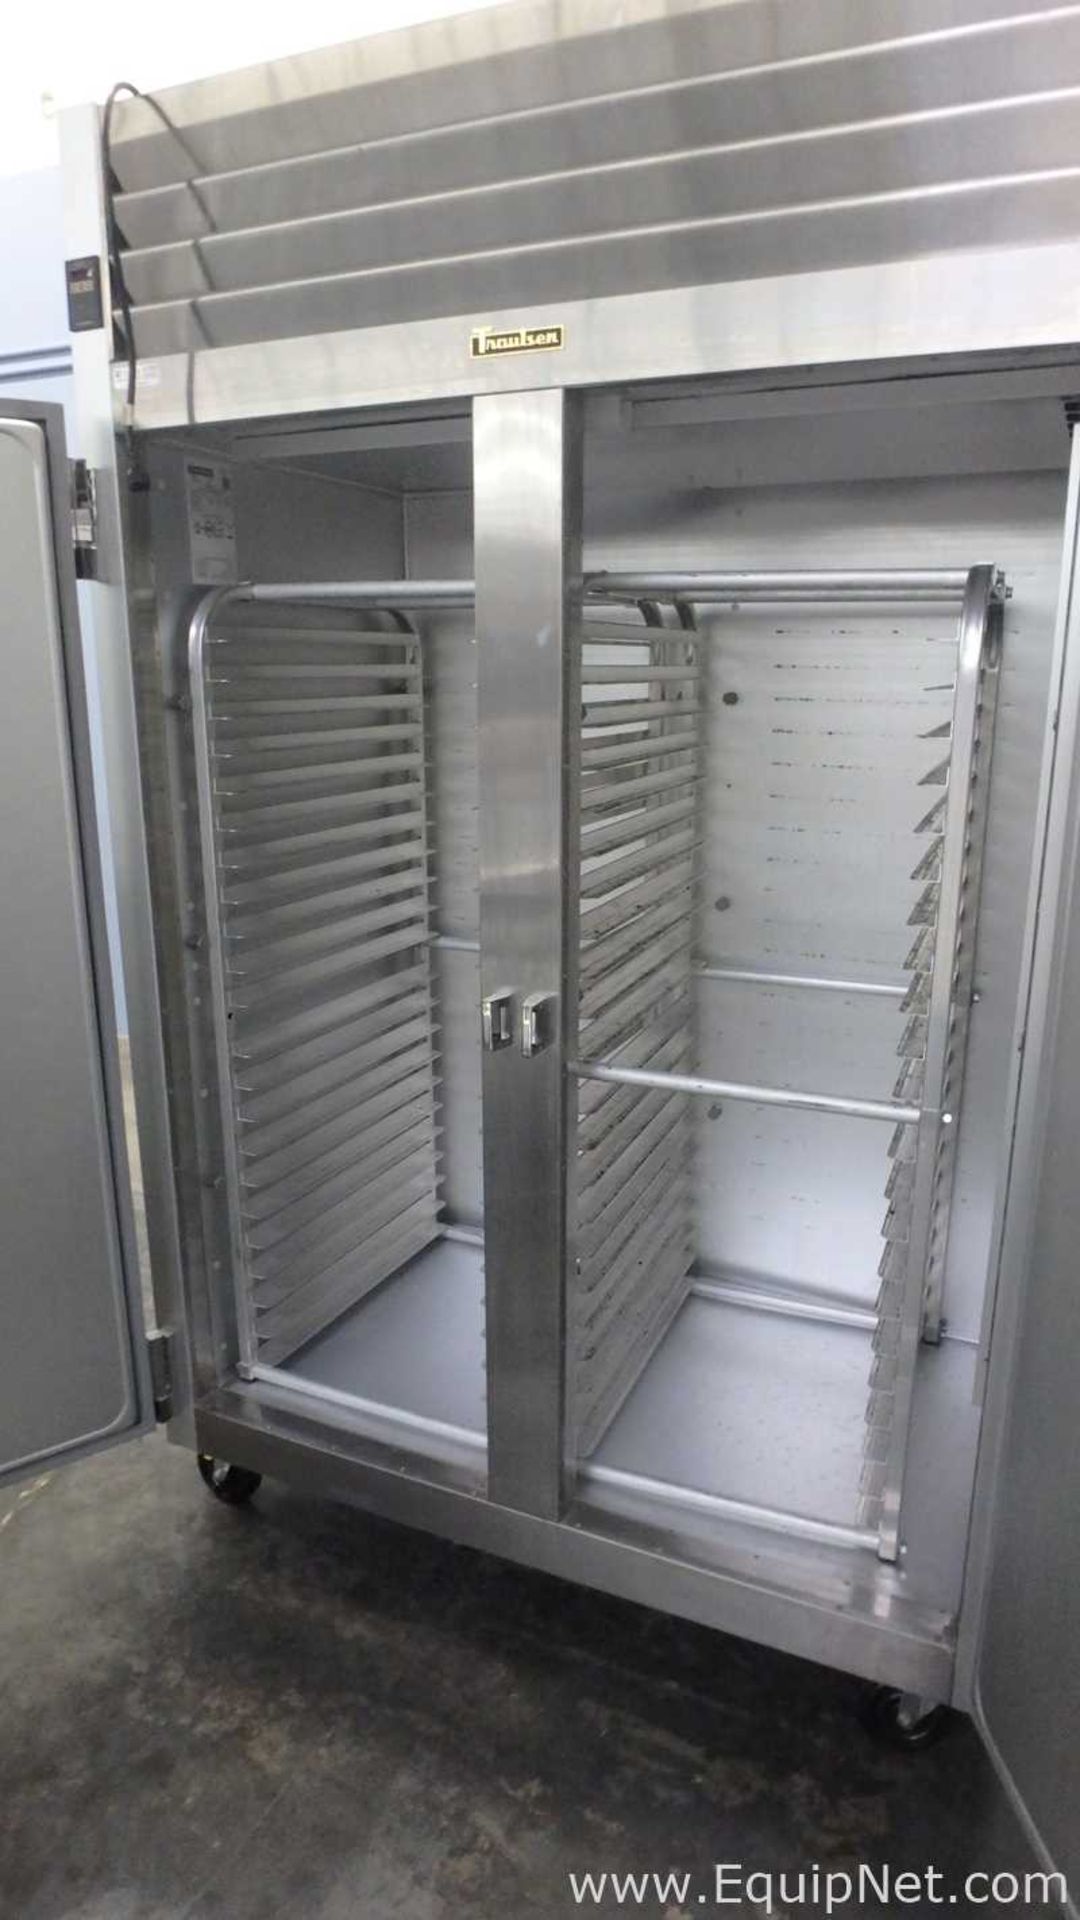 Traulsen G20010 52in 2-Section Solid Door Reach-In Refrigerator Left-Right Hinged Doors 46cuft - Image 3 of 12